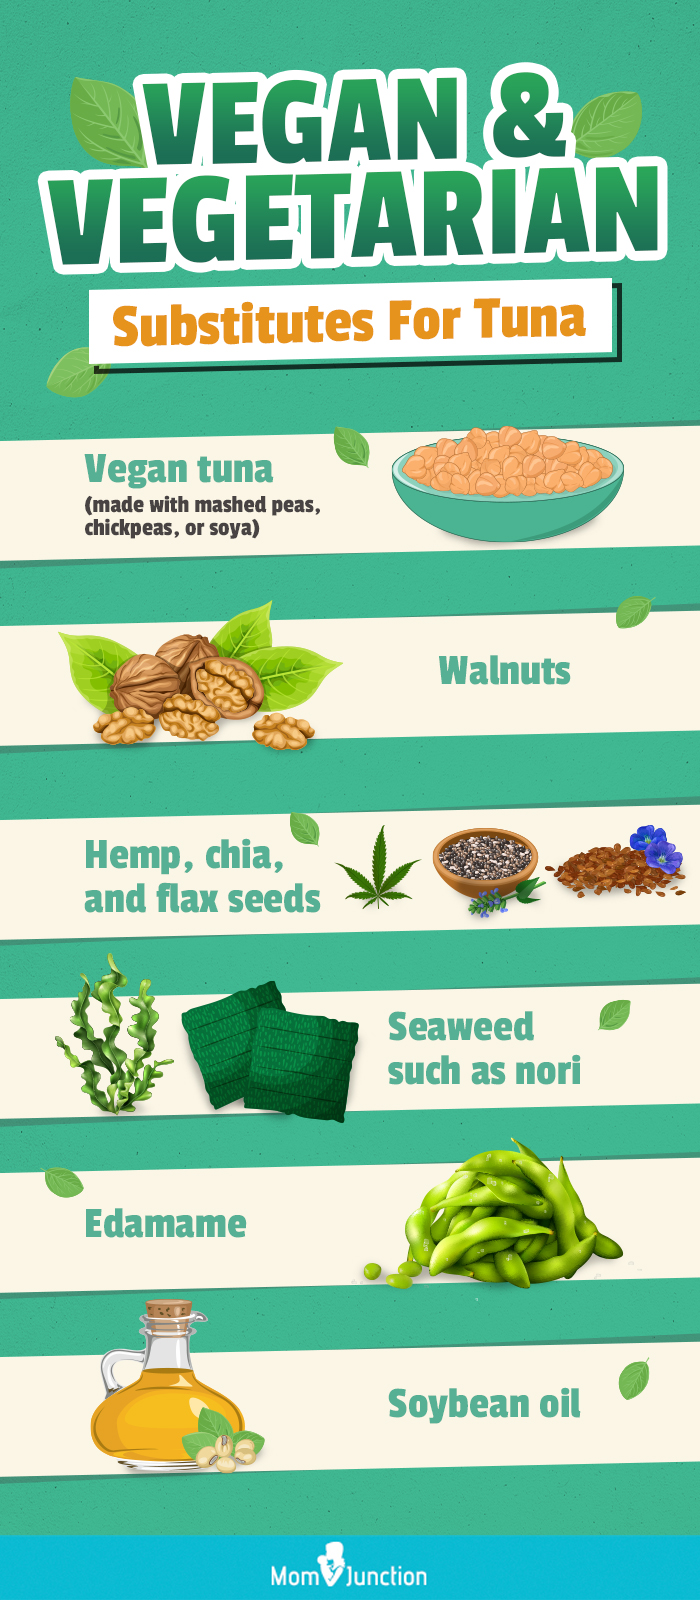 vegan and vegetarian substitutes for tuna (infographic)